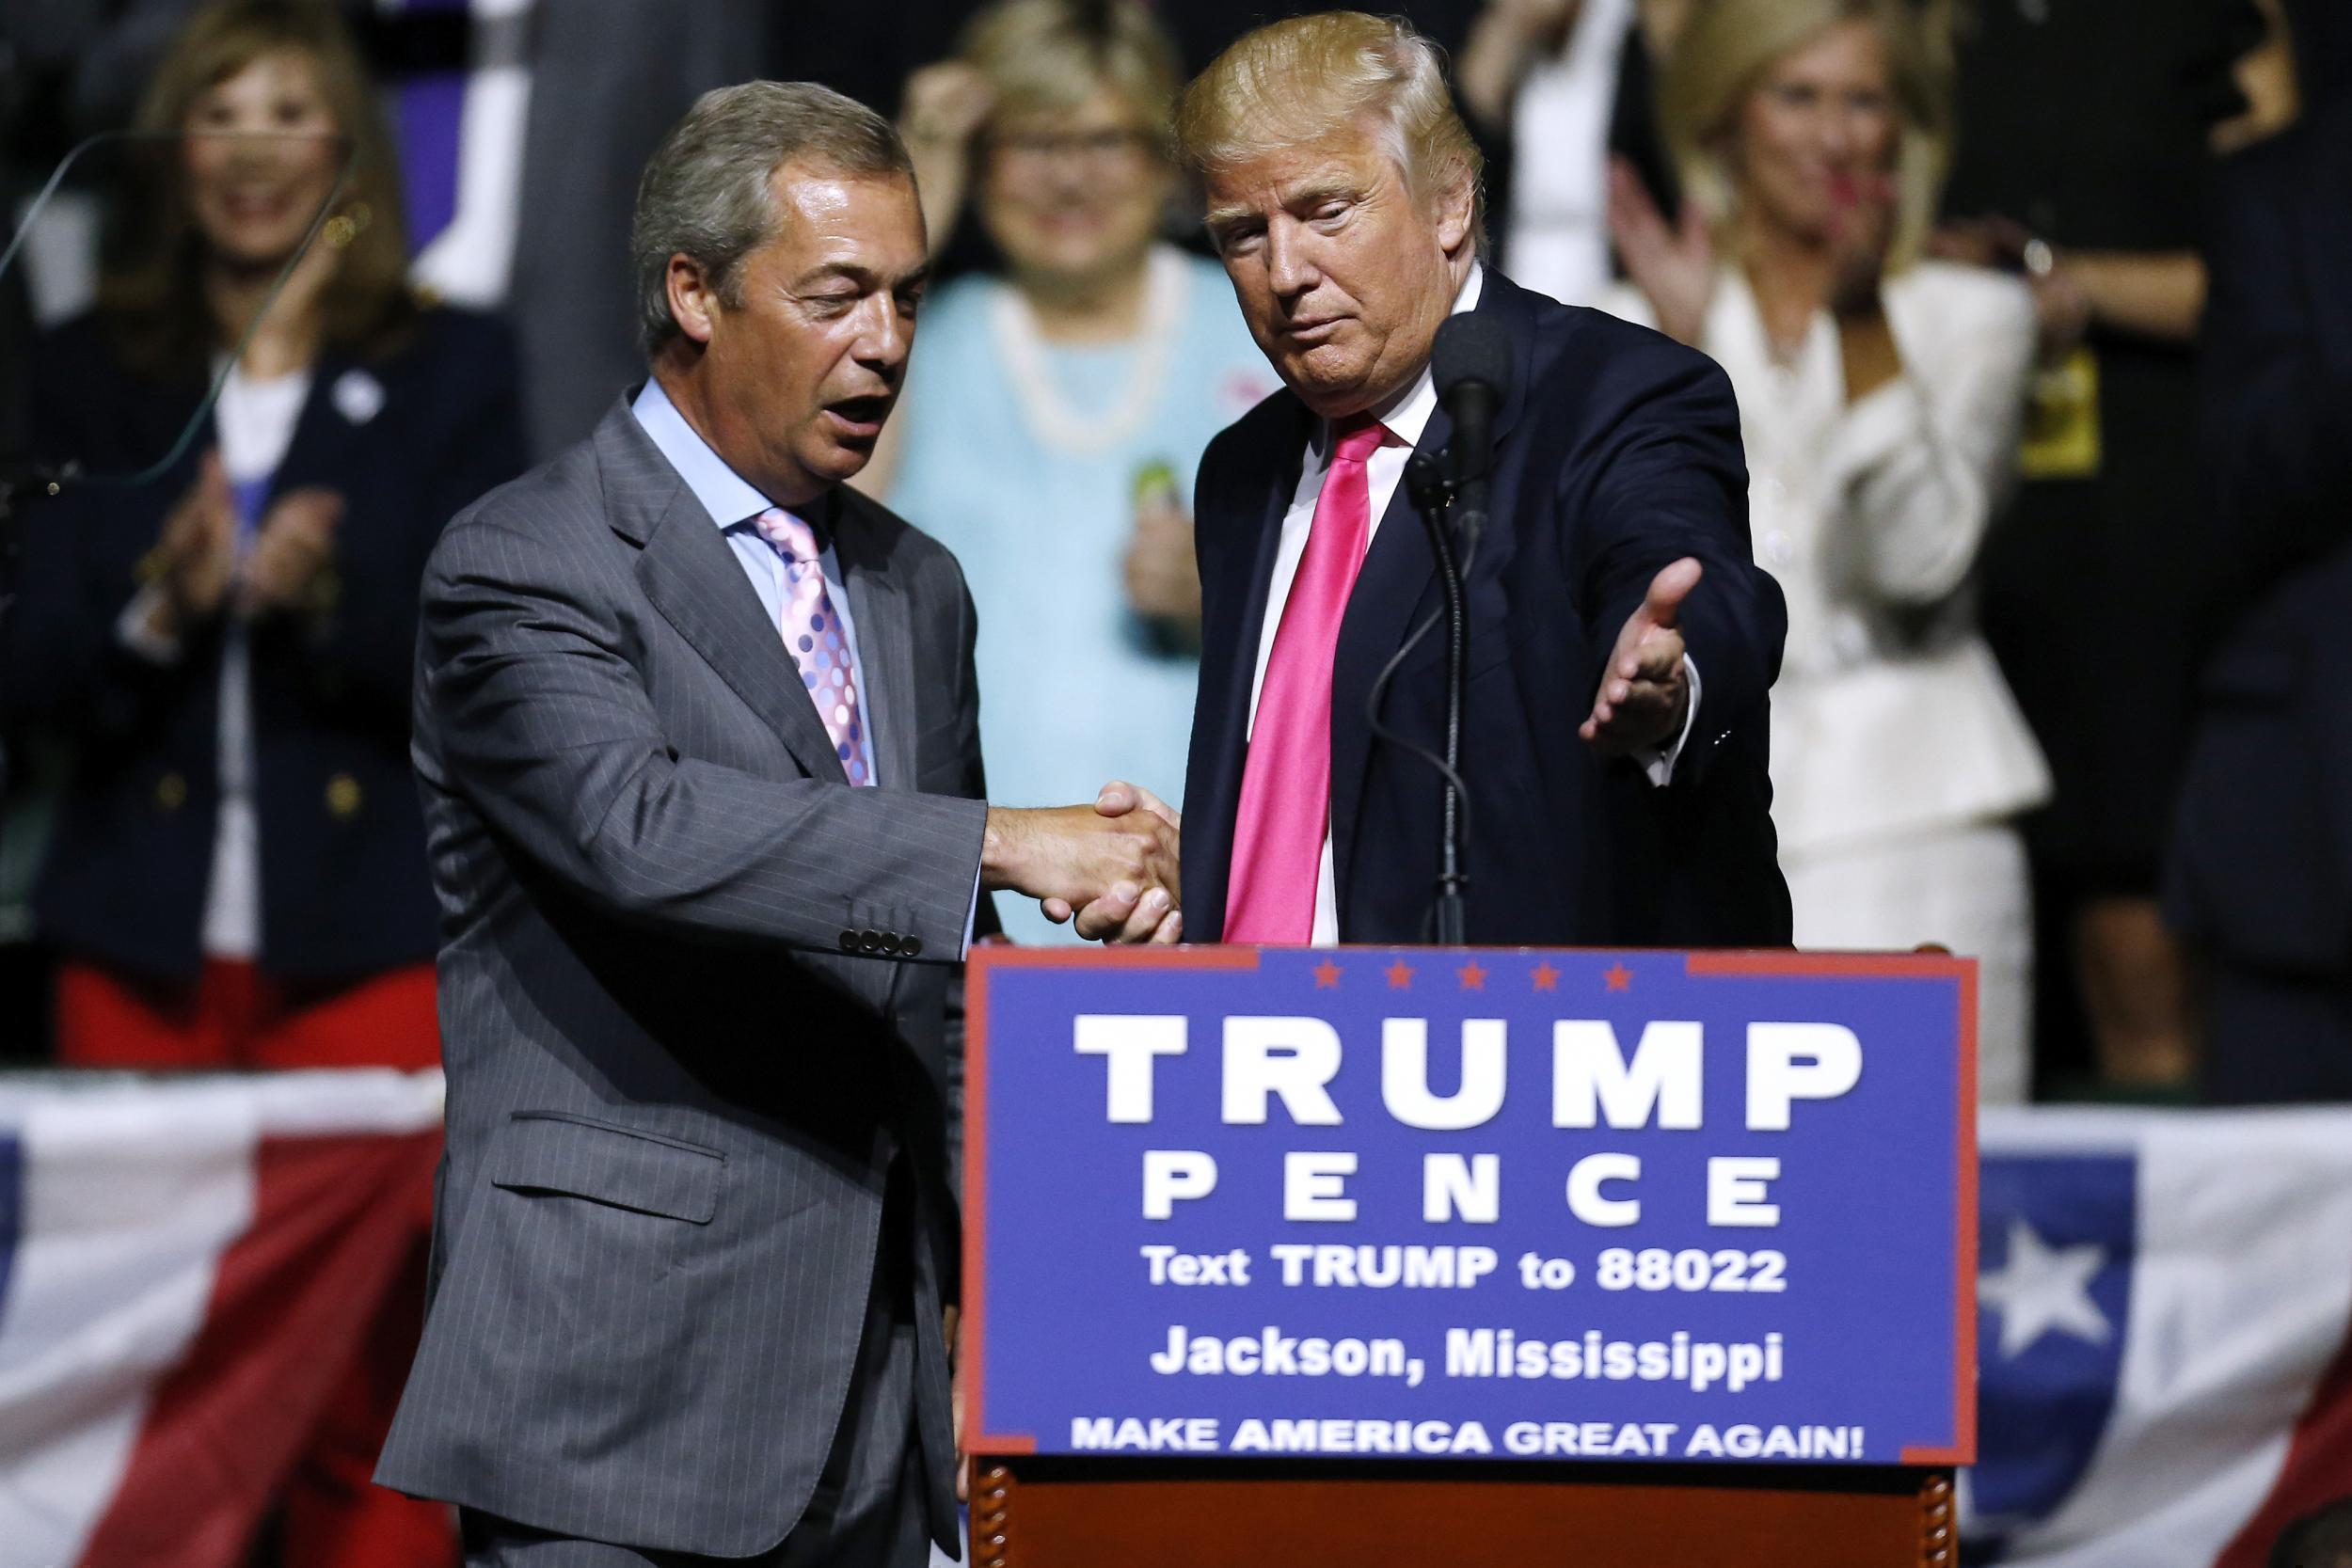 Trump and Farage and their joint act in Mississippi on Wednesday